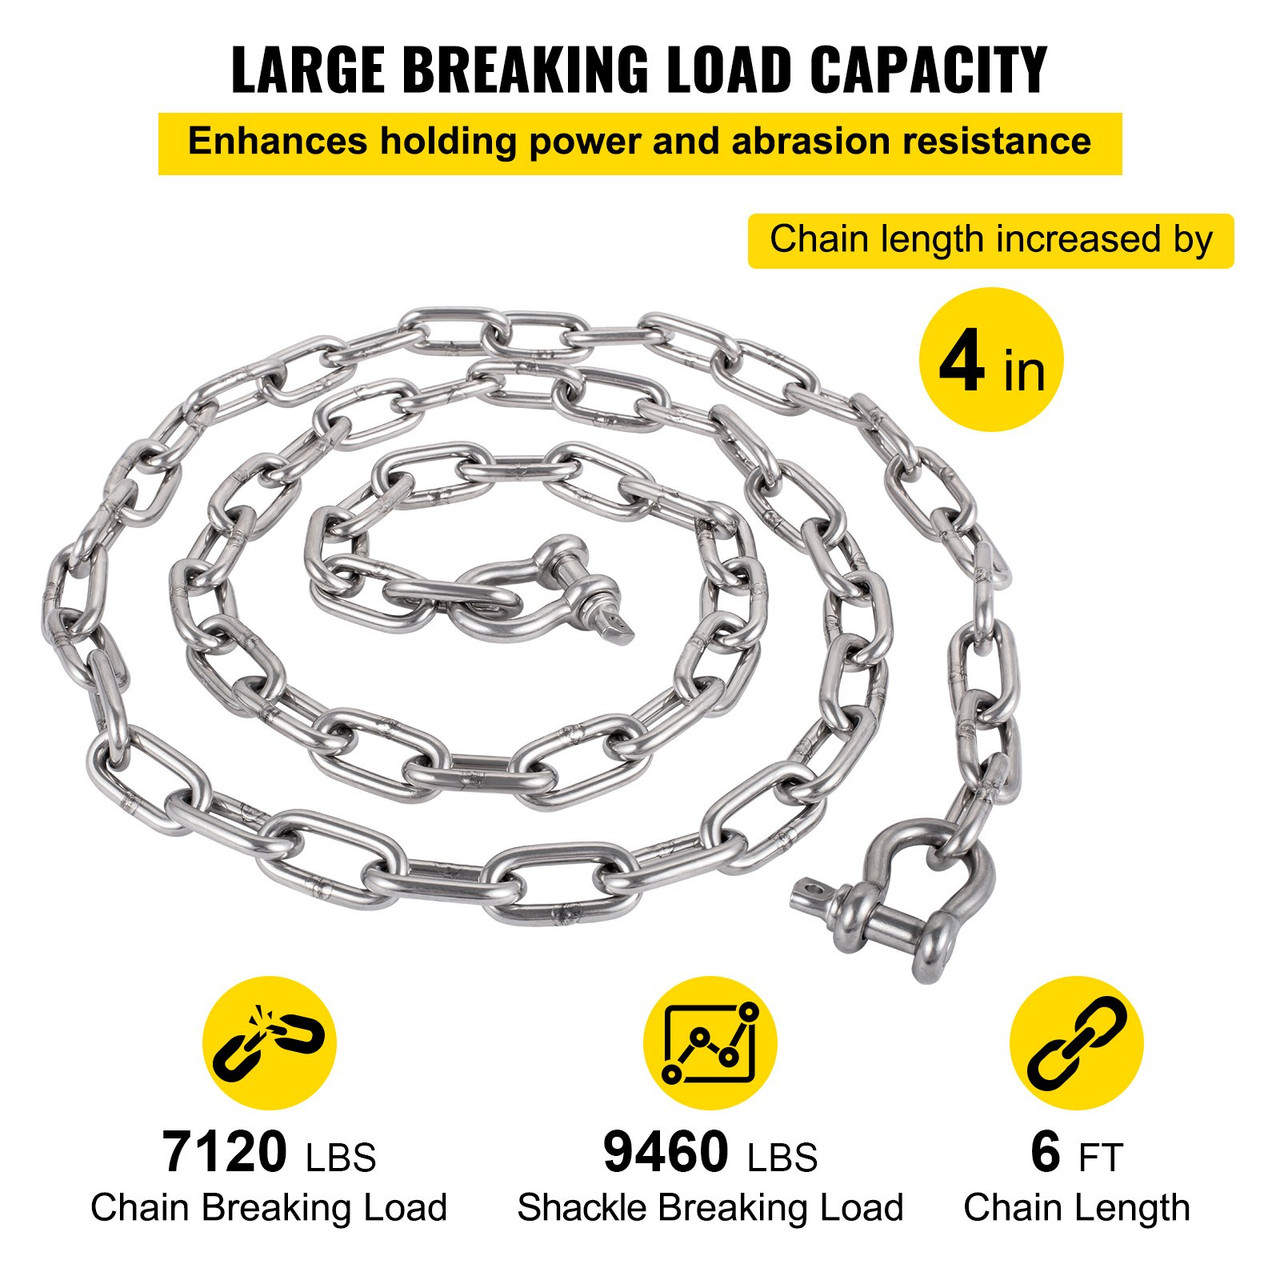 VEVOR Anchor Chain, 6' x 5/16" 316 Stainless Steel Chain, 3/8" Anchor Chain Shackle, 7120lbs Anchor Lead Chain Breaking Load, 9460lbs Anchor Chain Shackle Breaking Load, Anchor Chain for Small Boats